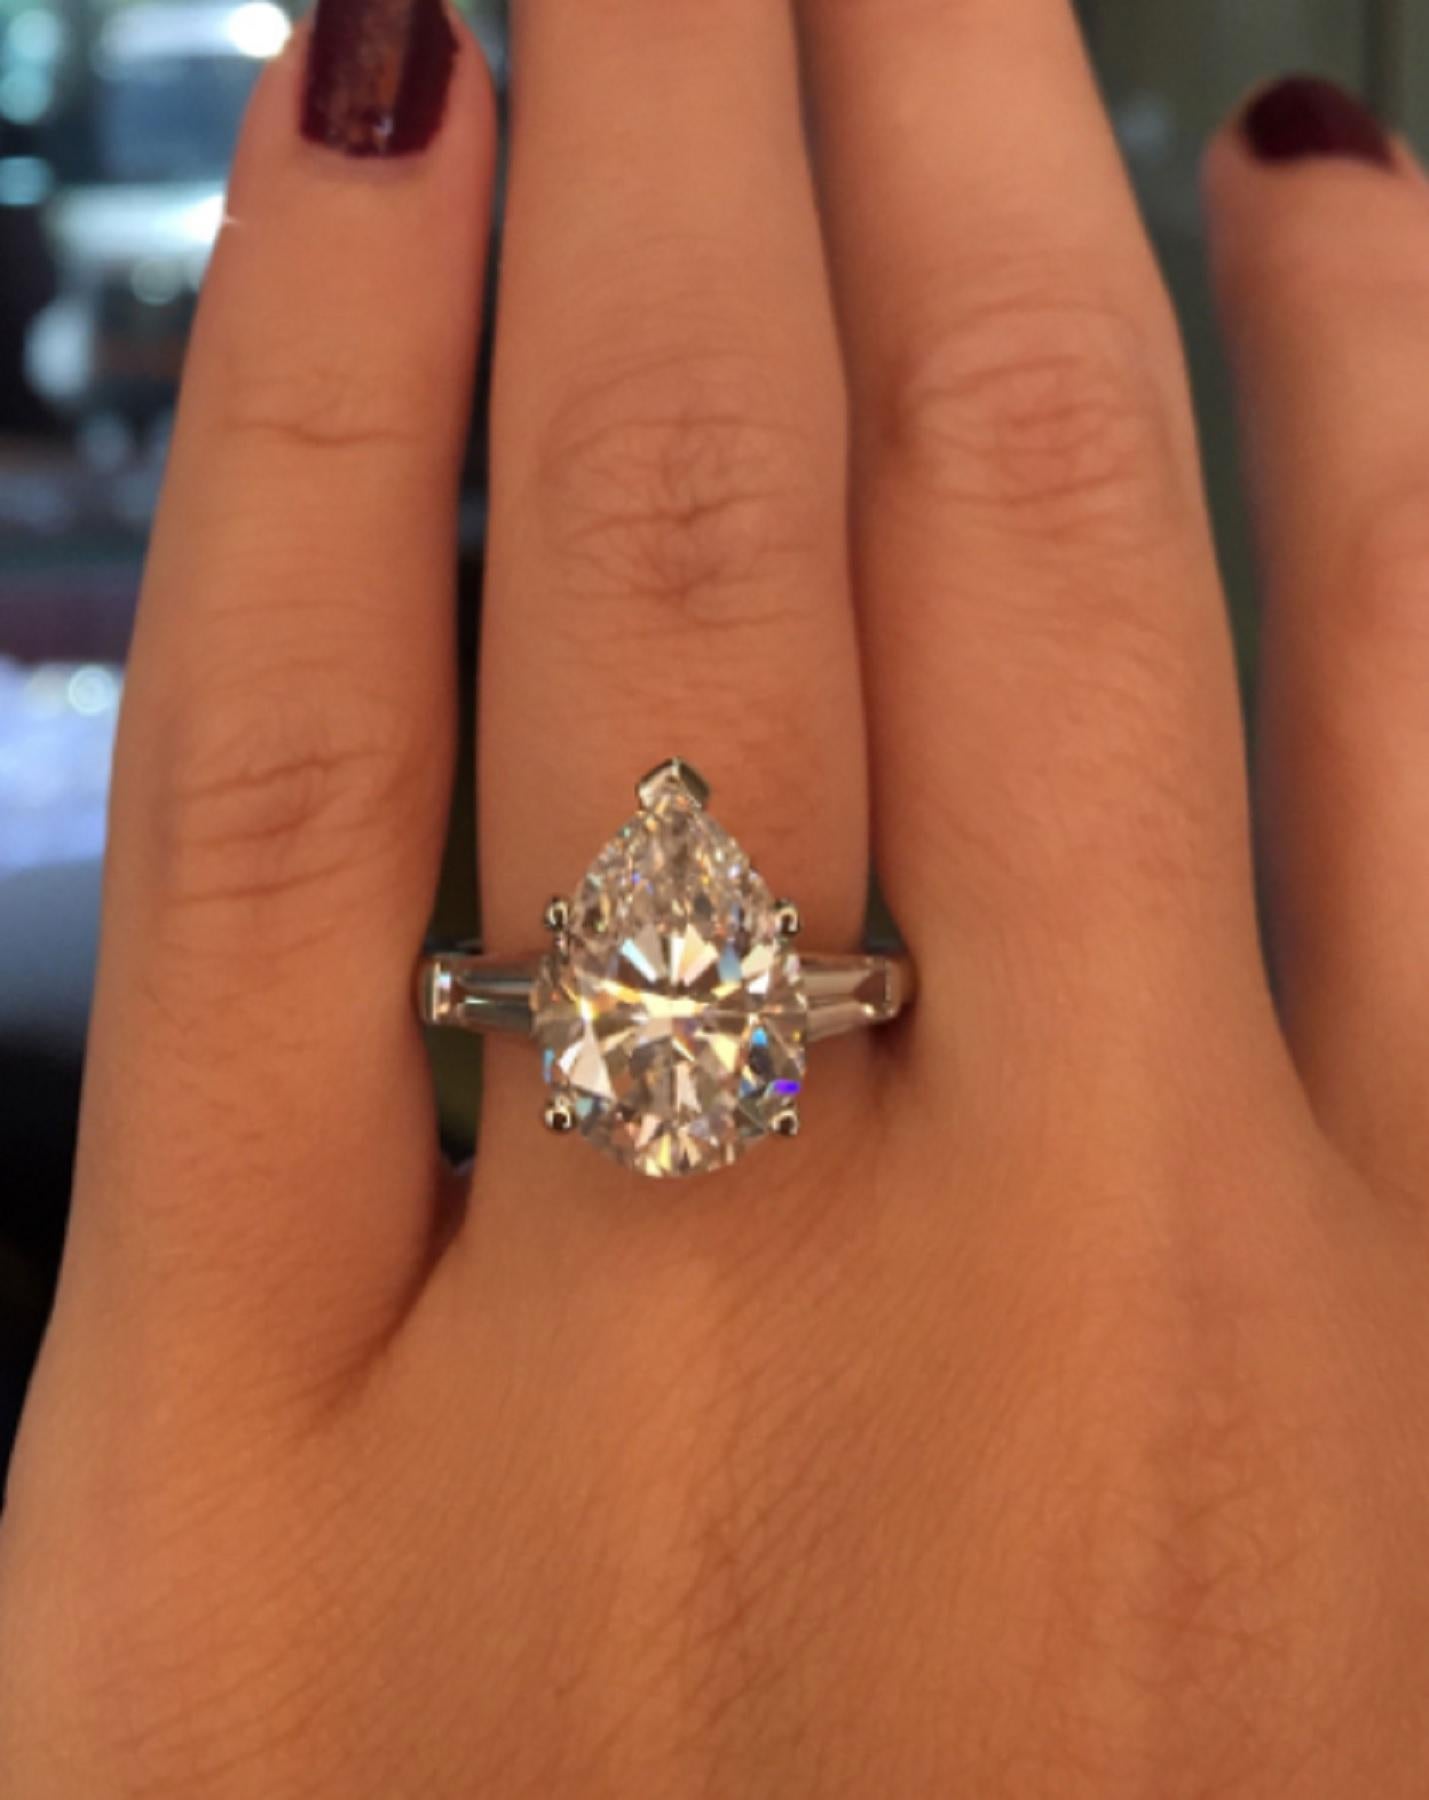 An exquisite GIA certified 3.21 carat pear cut diamond ring composed by a main stone with very good polish, very excellent symmetry and faint fluorescence 

The side diamonds are two baguettes with excellent proportions and color and clarity

the